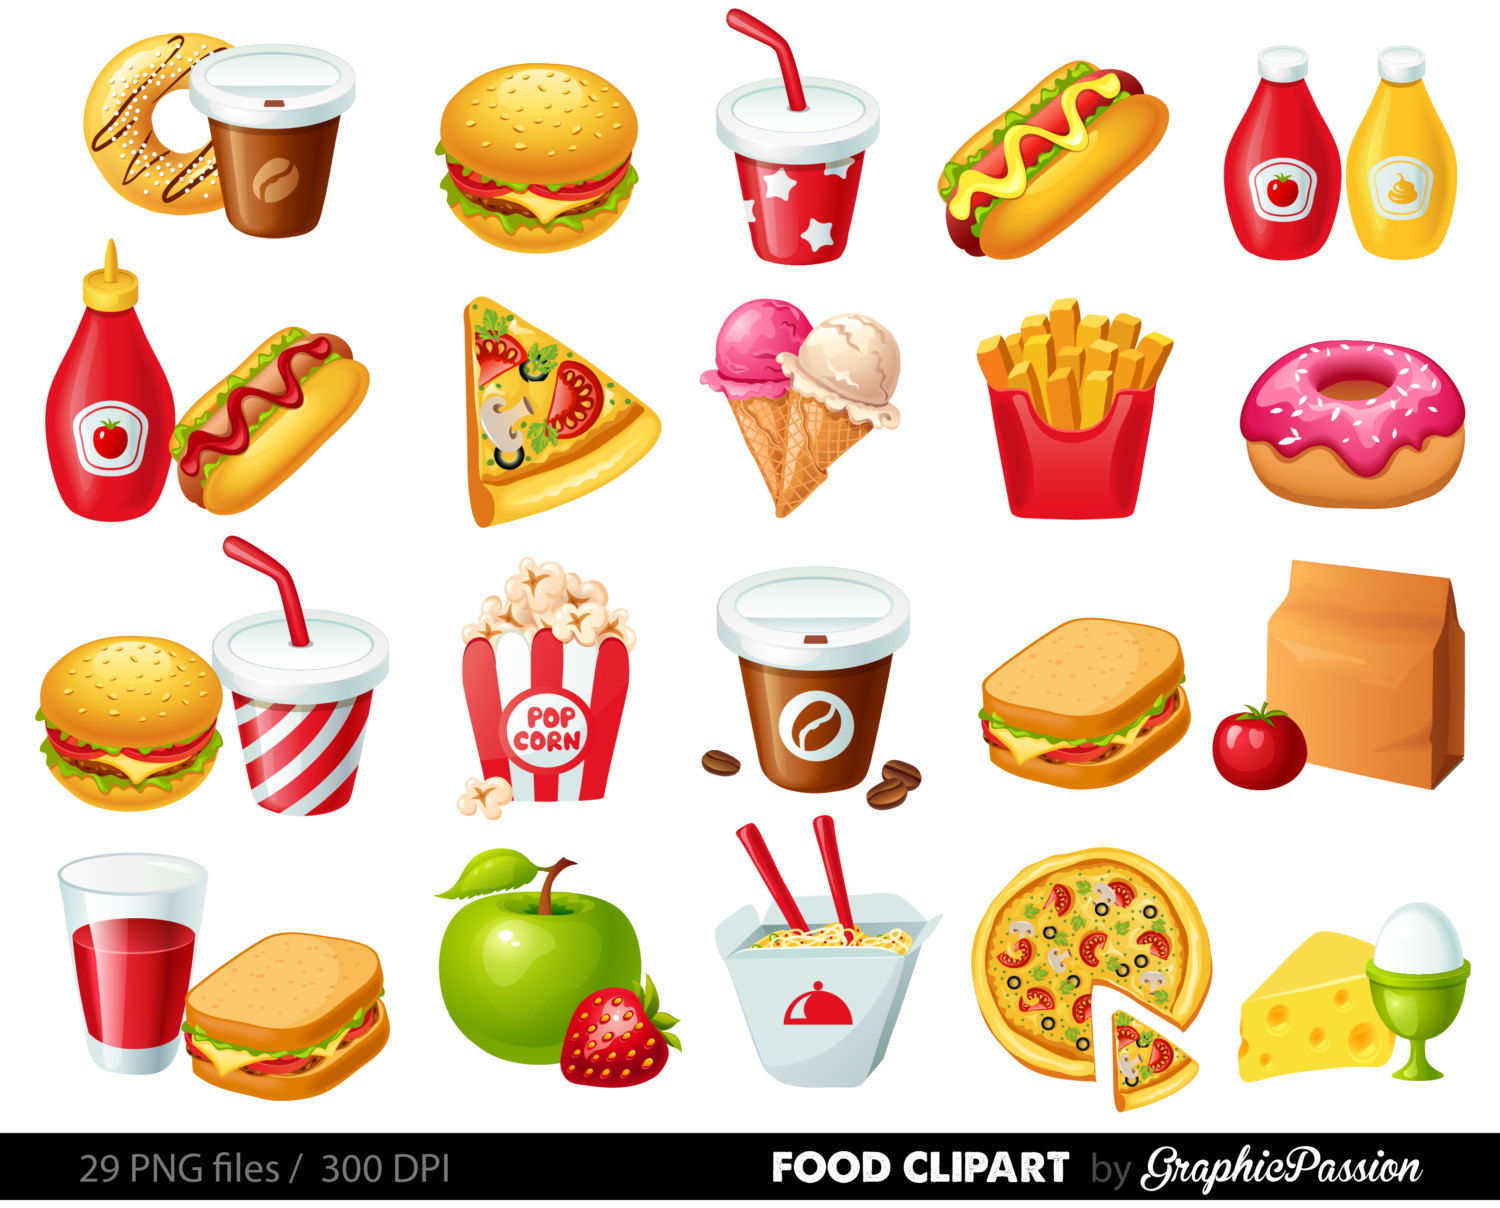 Healthy Food Clipart . food clipart